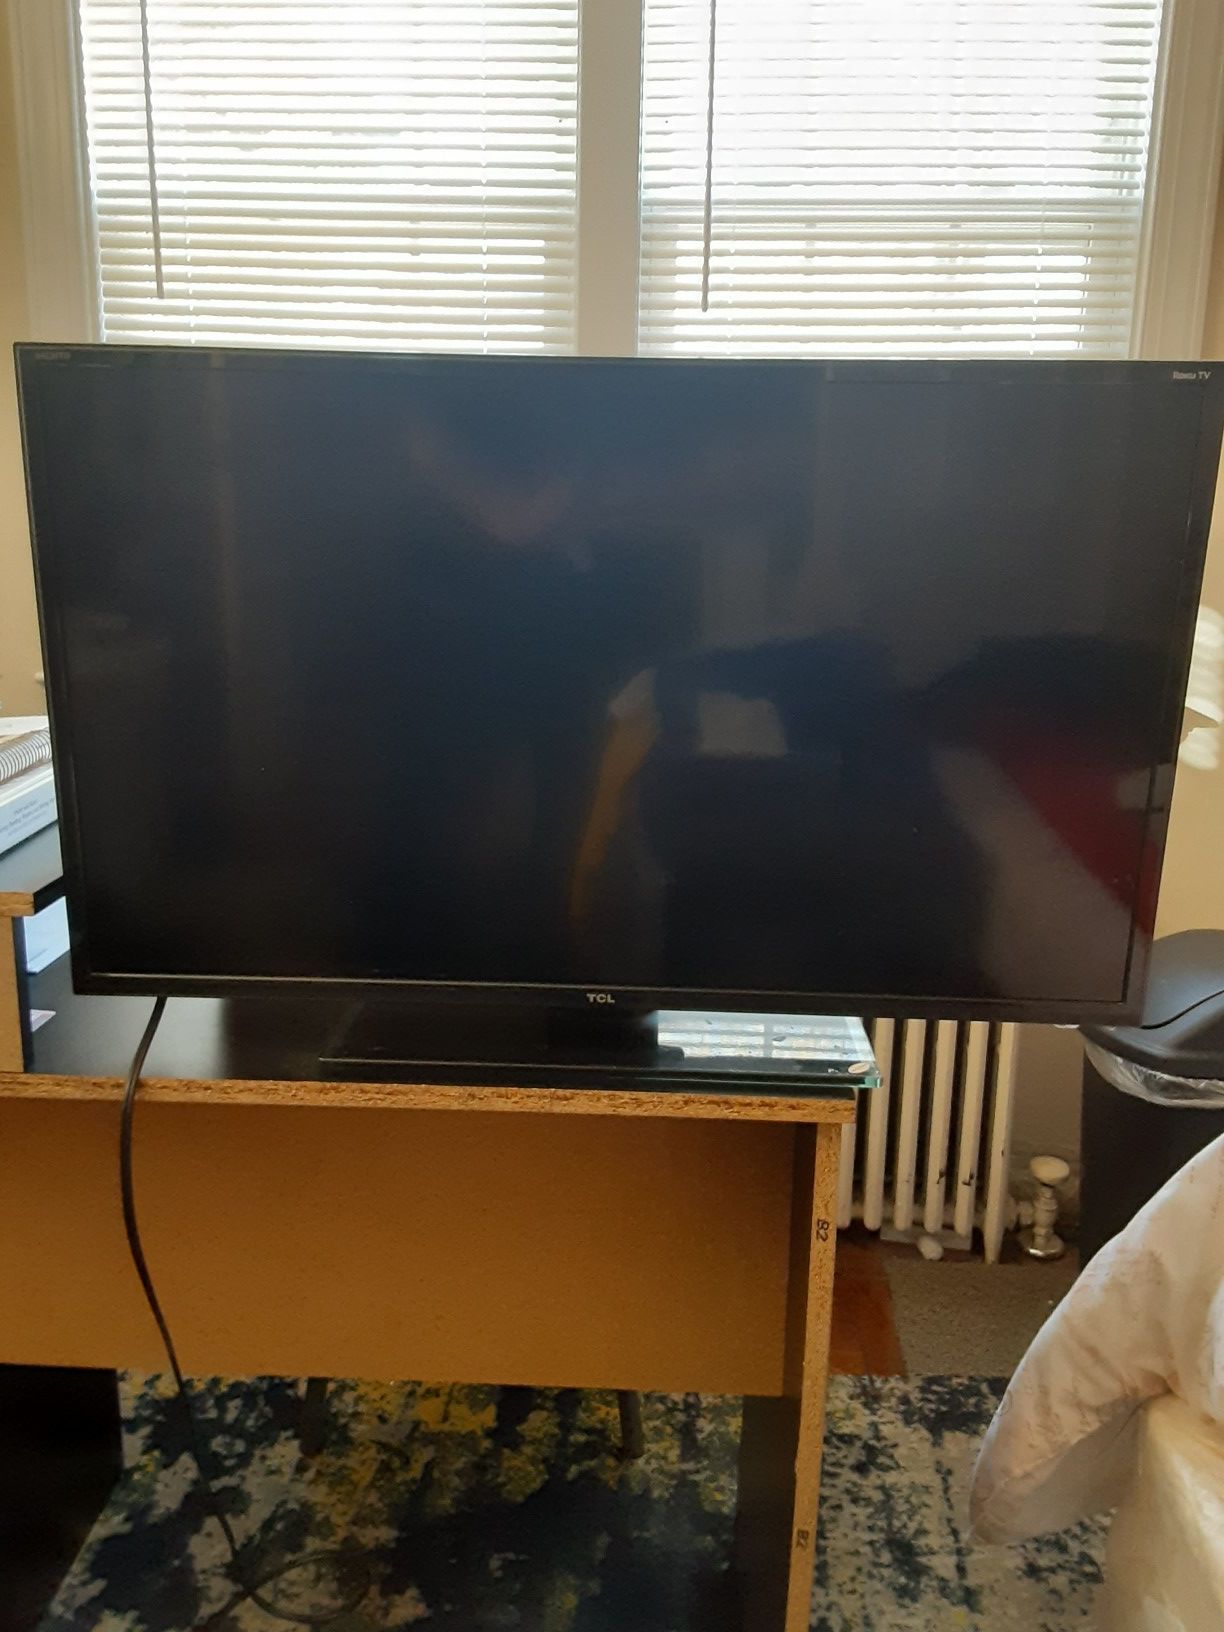 I have two 32inch TV's for sale, one is a Samsung that works perfectly fine and I have a TCL TV that work perfectly fine as well